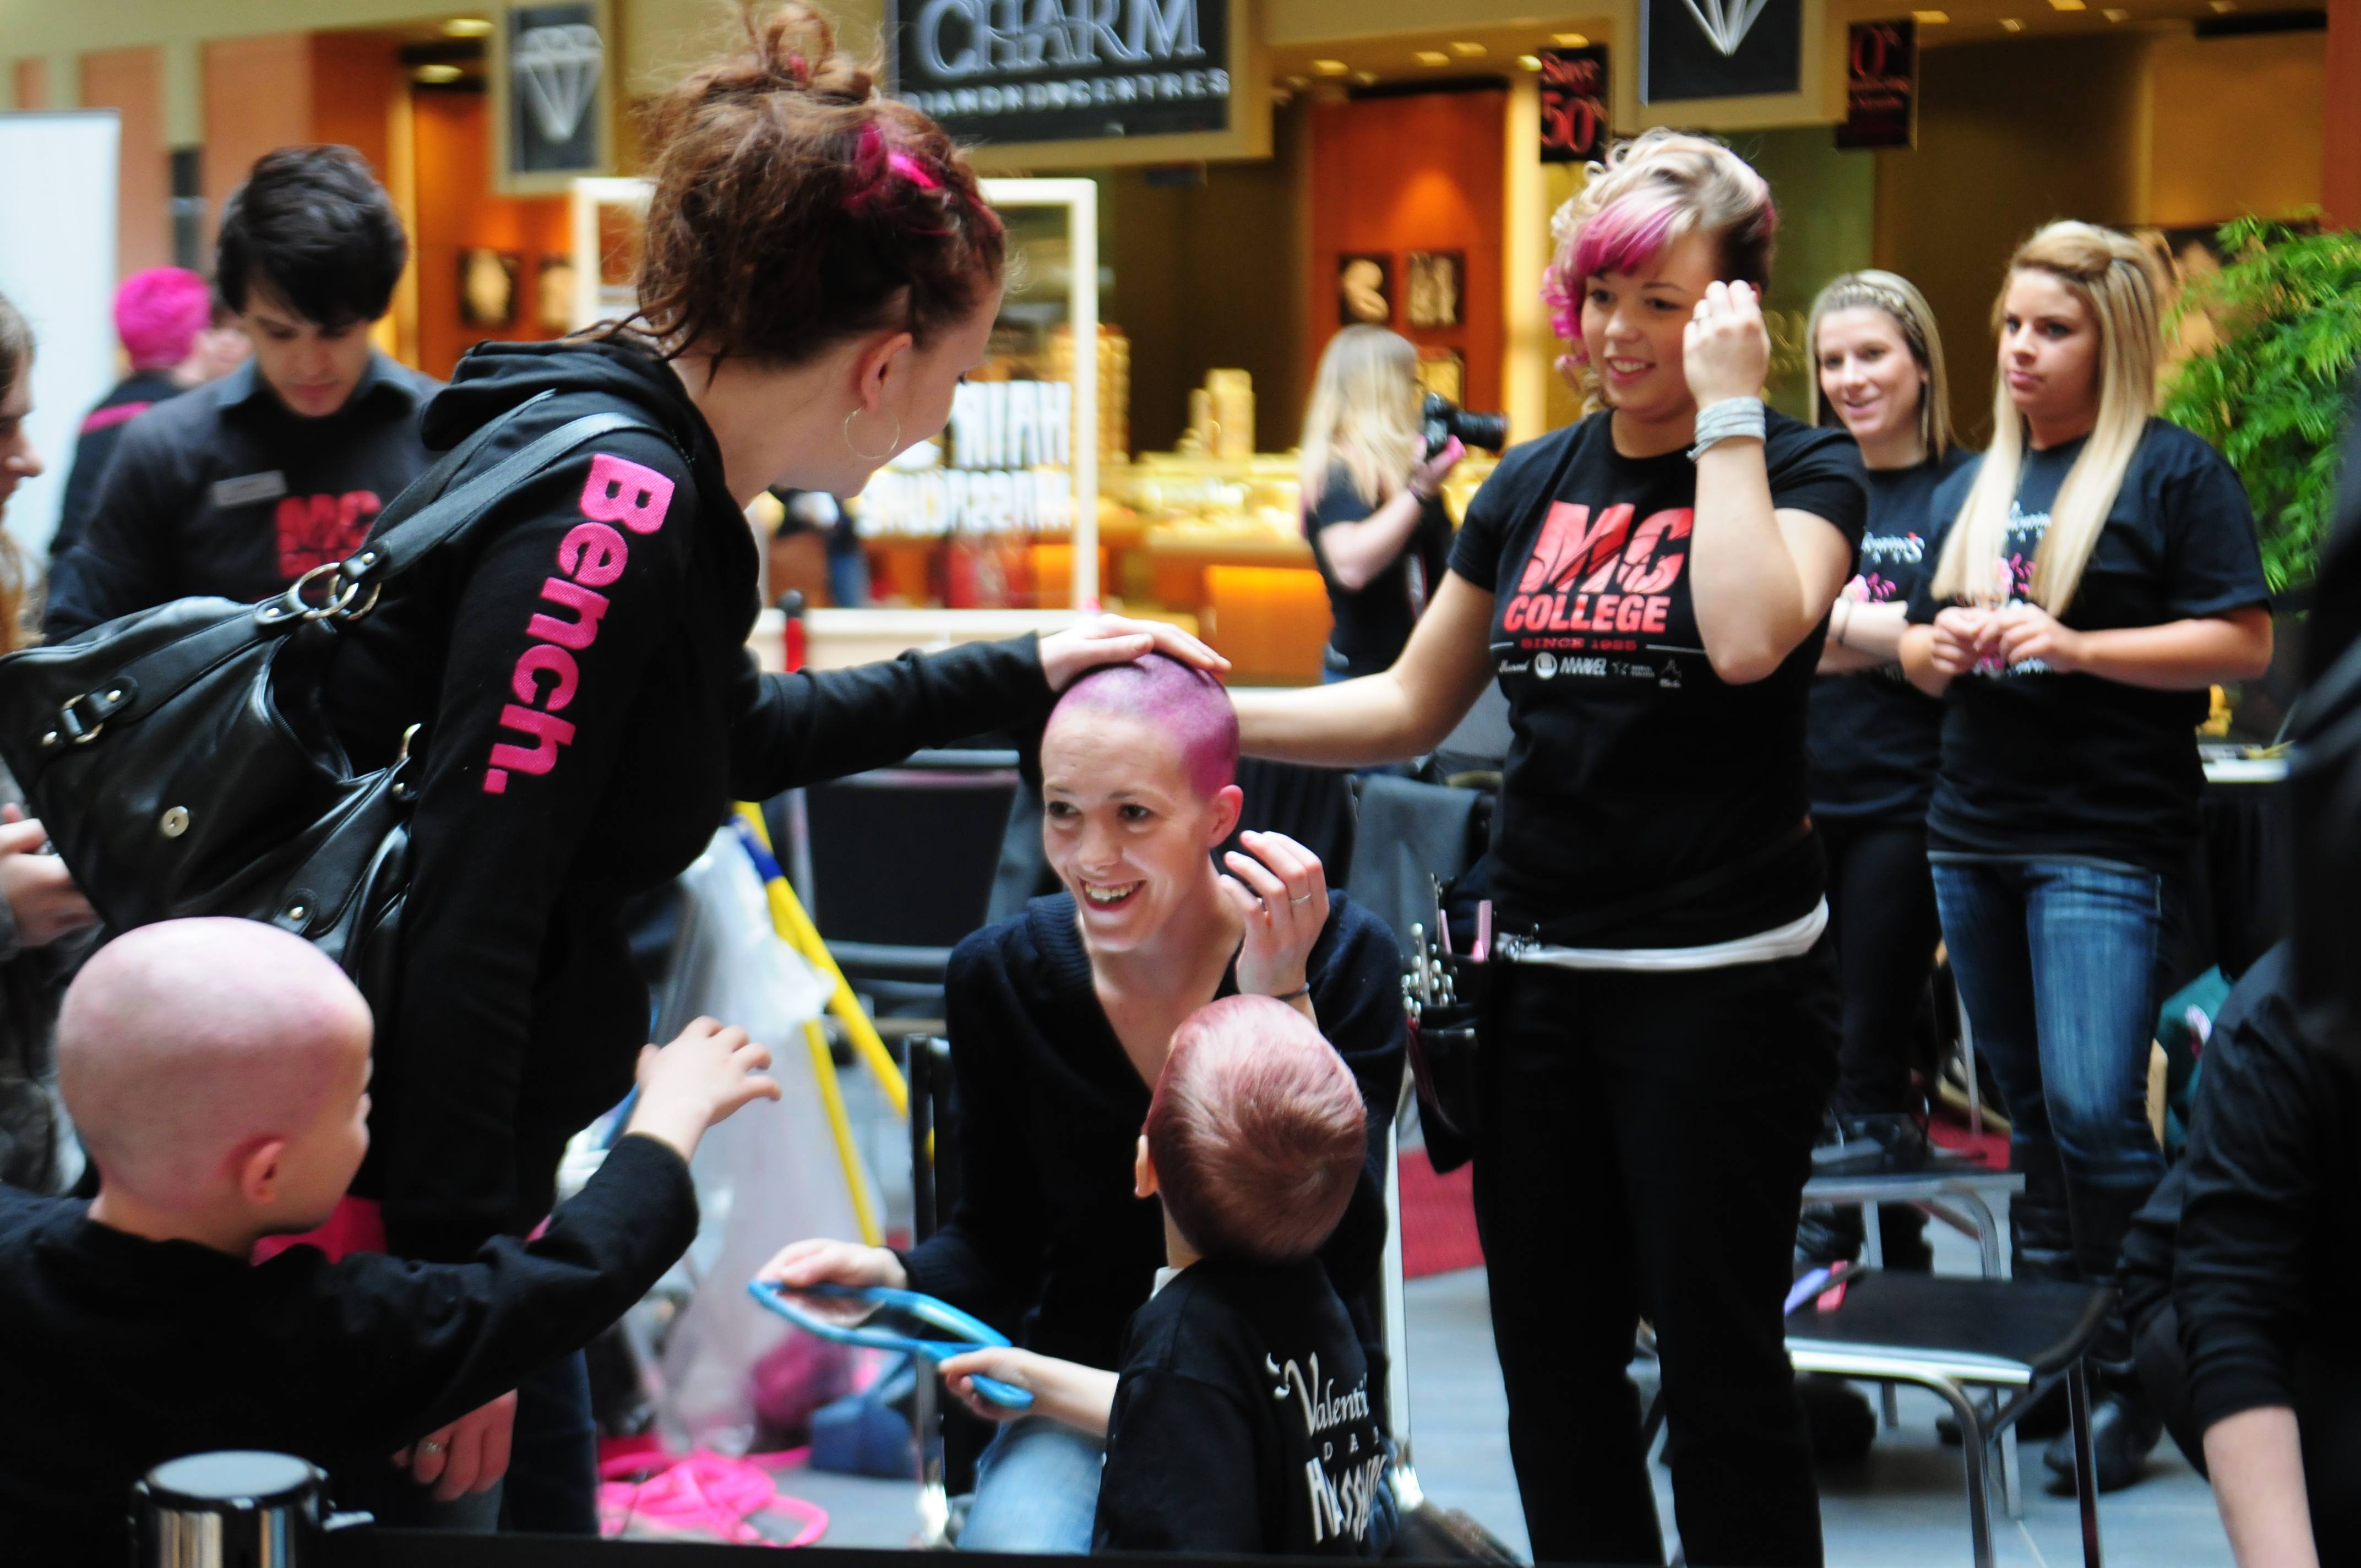 SMOOTH- Kristine Johnston lets her friend feel her head during the second annual Hair Massacure this past weekend at the Bower Mall. The event raised about $36